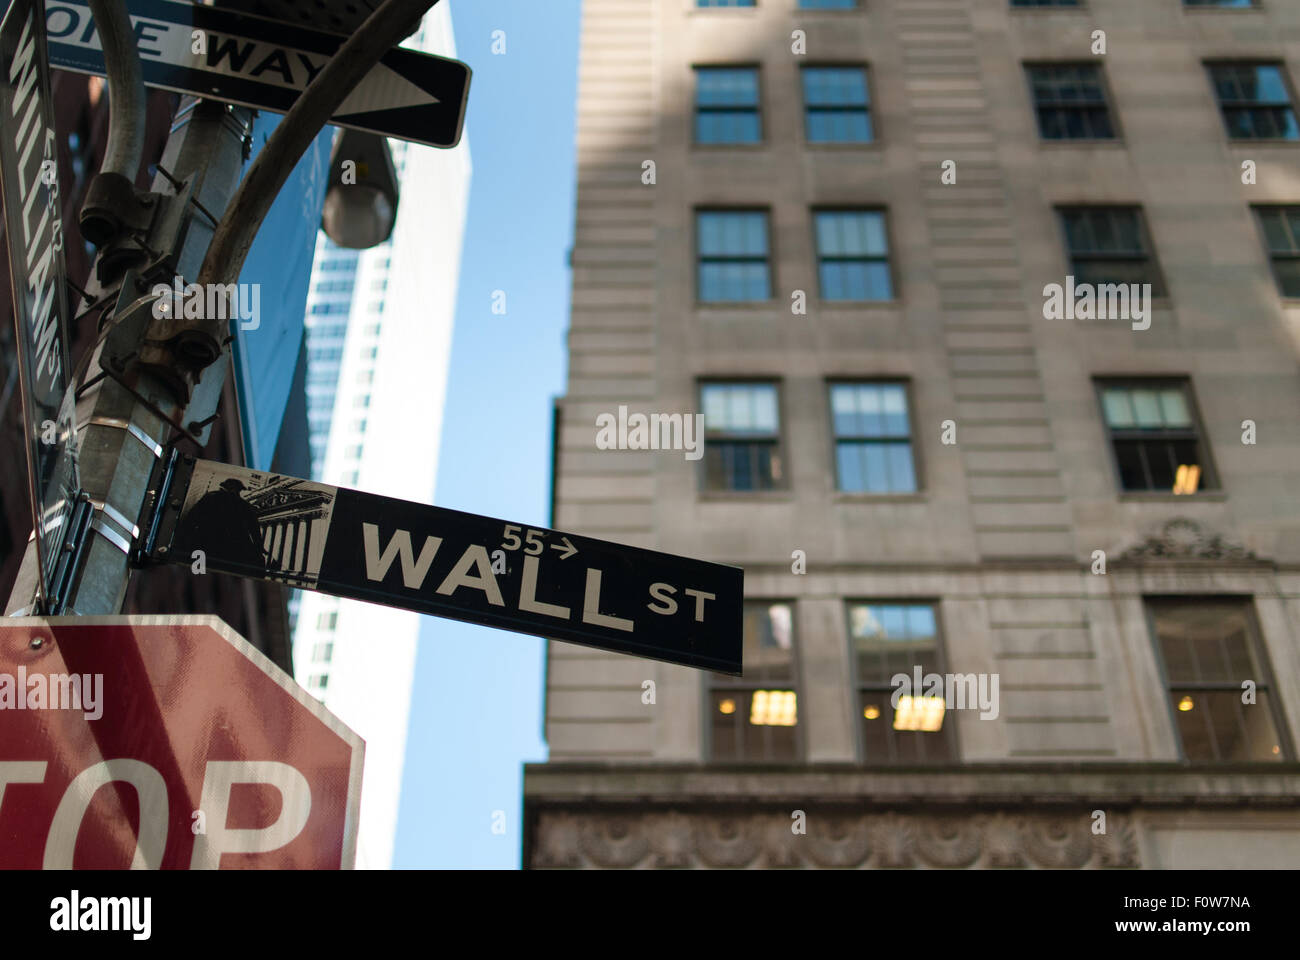 Wall St sign in New York City Stock Photo